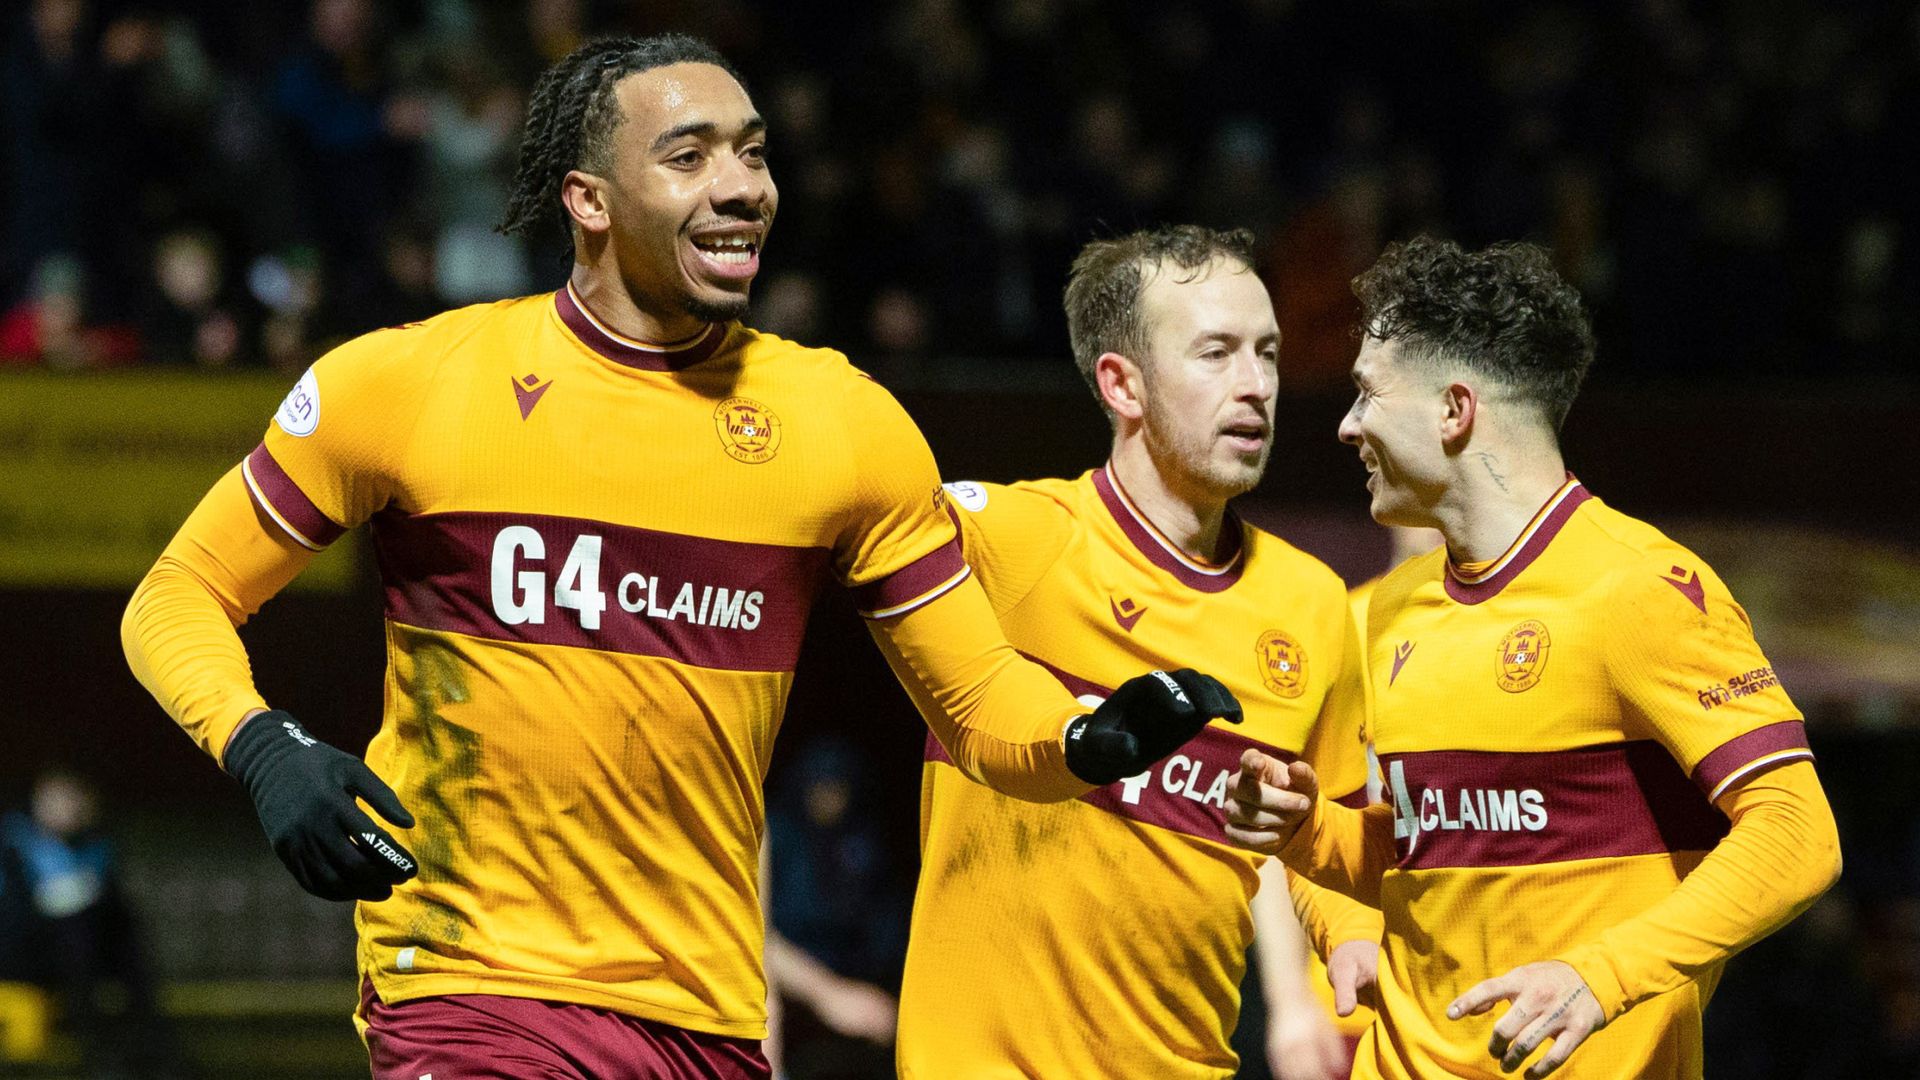 Motherwell hit five past Ross County